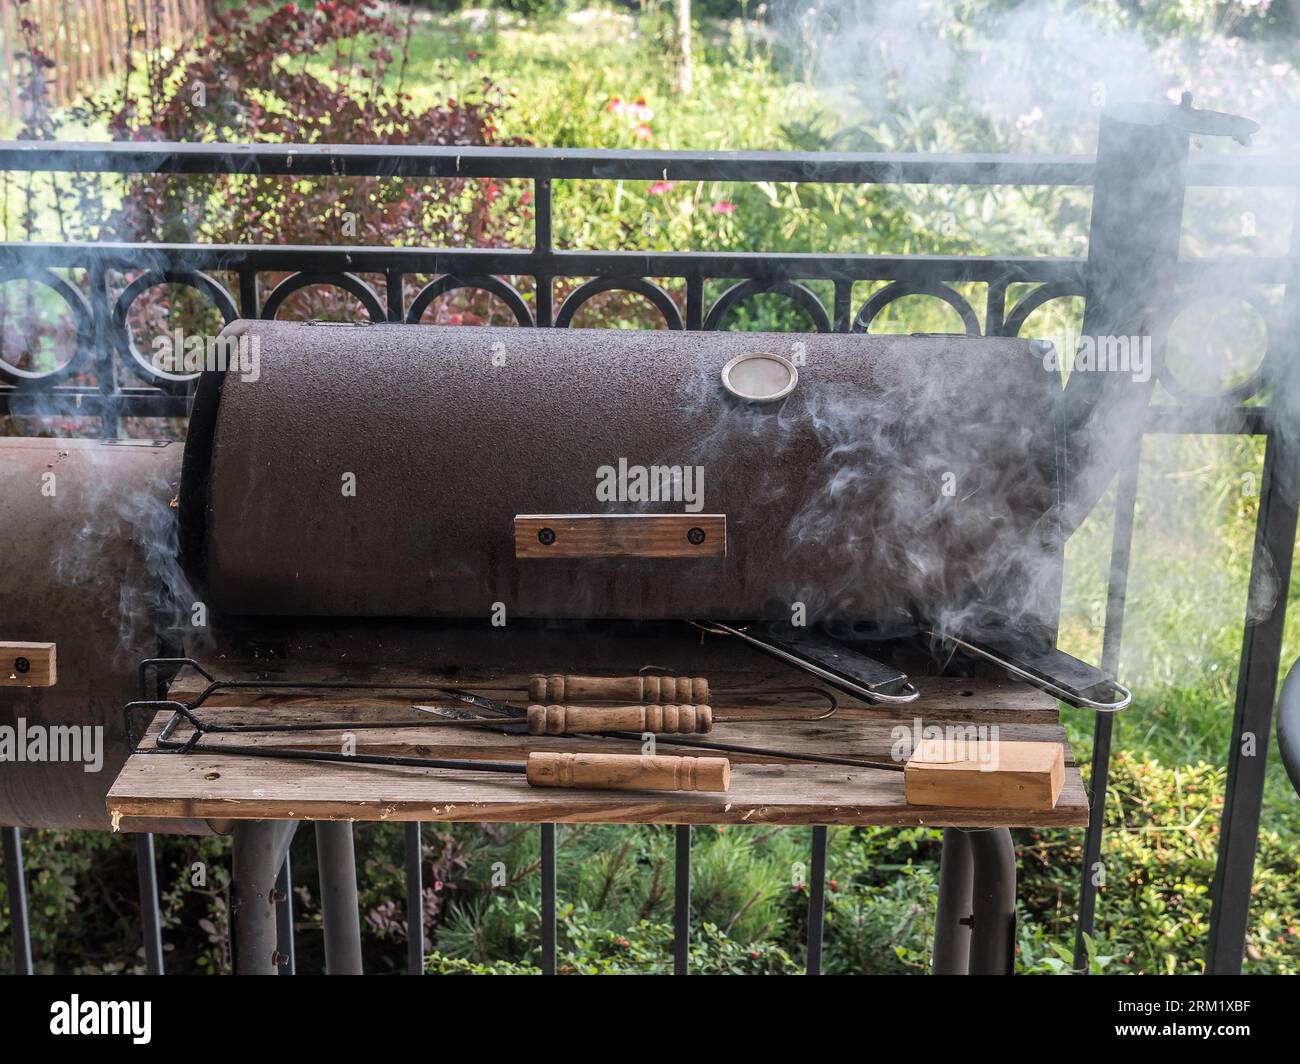 Two whole trout fish being grilled on barbecue Stock Photo